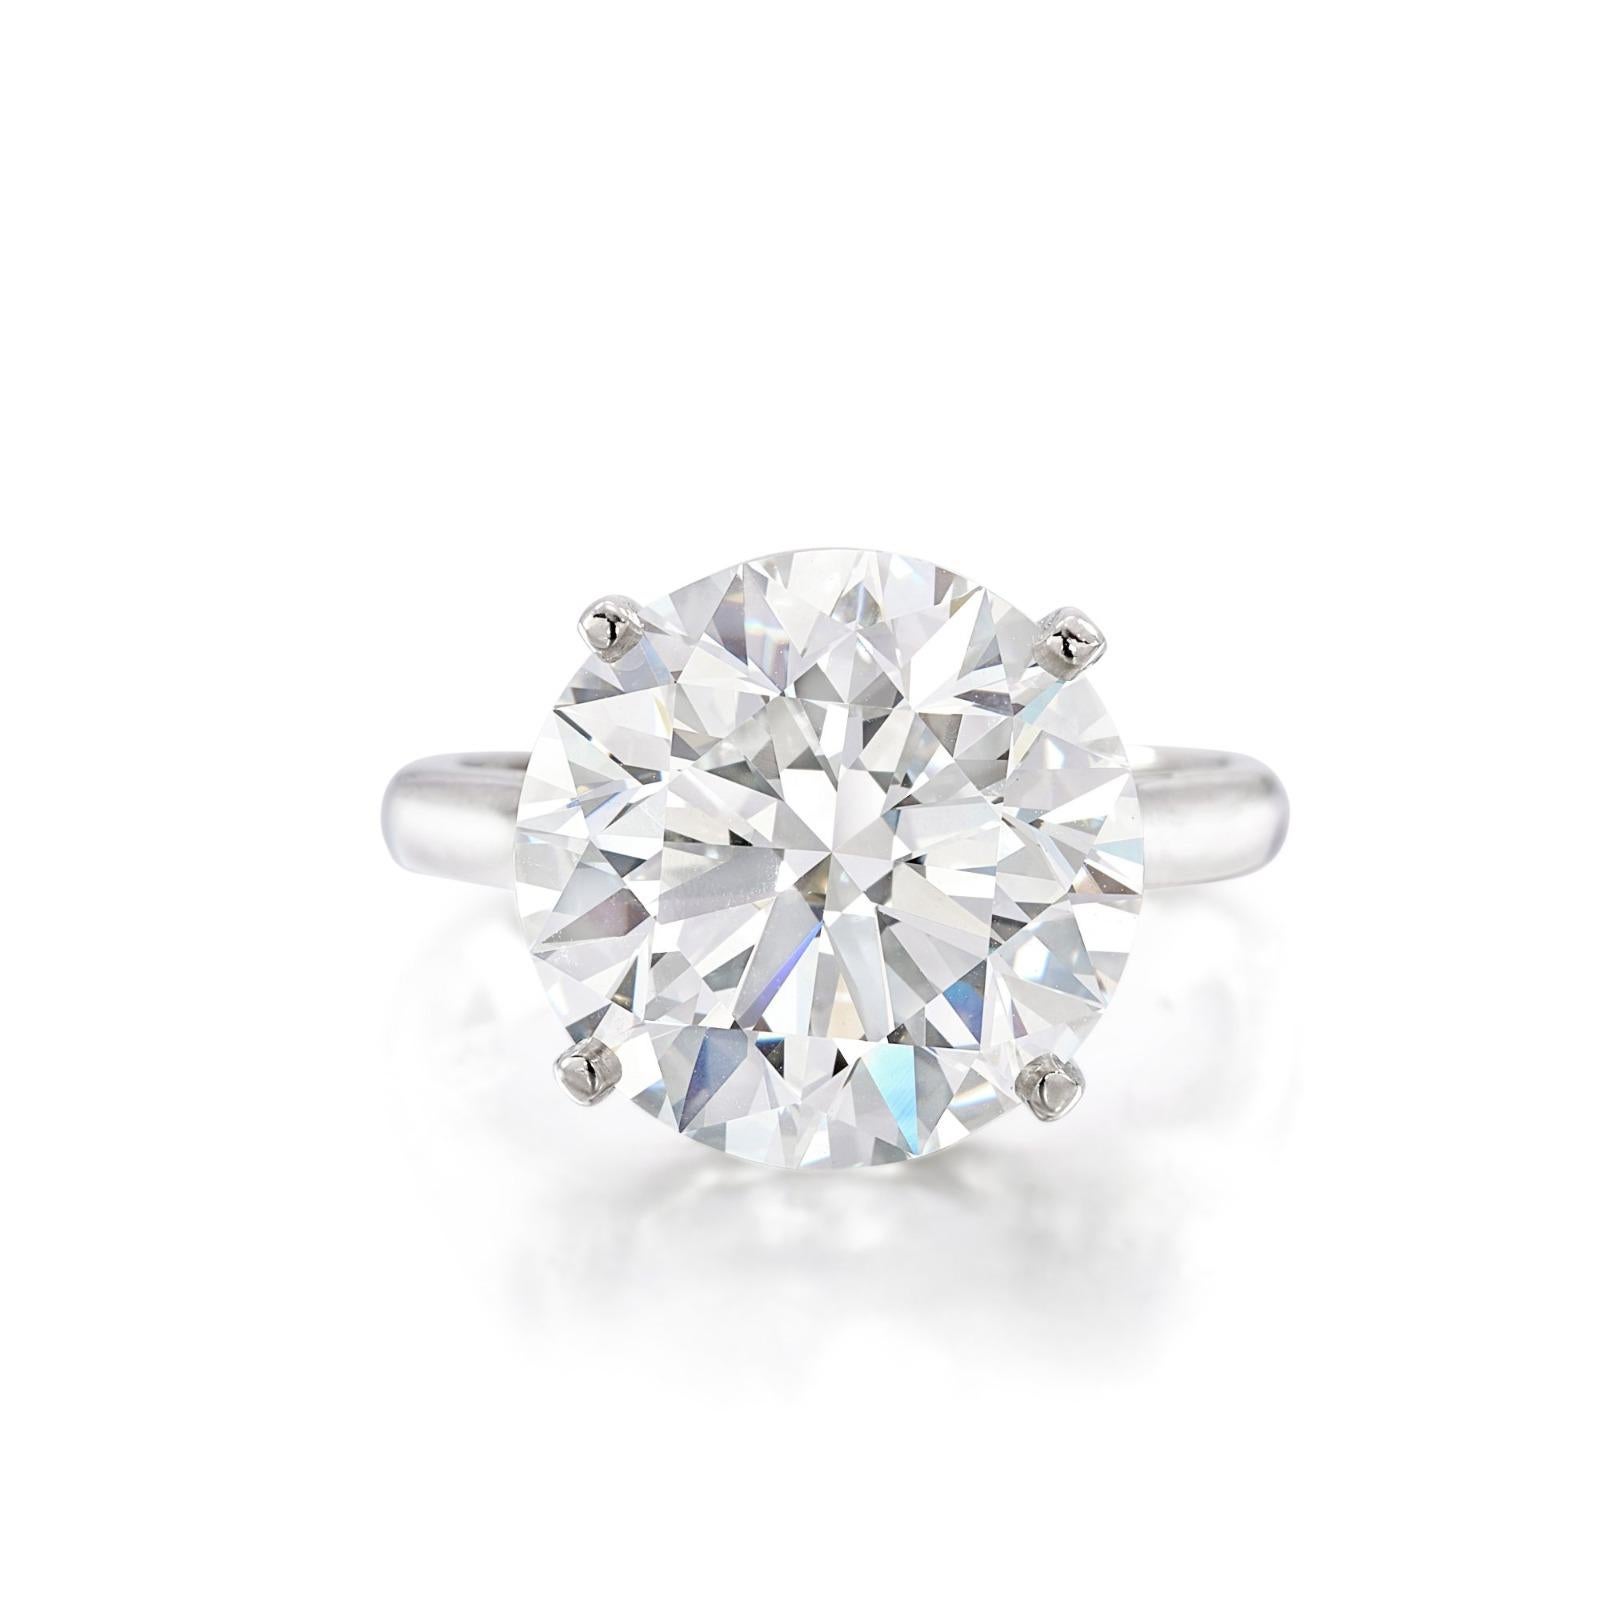 This engagement ring embodies sheer elegance with its GIA certified round-cut diamond showcased in a platinum solitaire setting. The brilliance of the diamond, certified by the Gemological Institute of America, is accentuated by the simplicity of